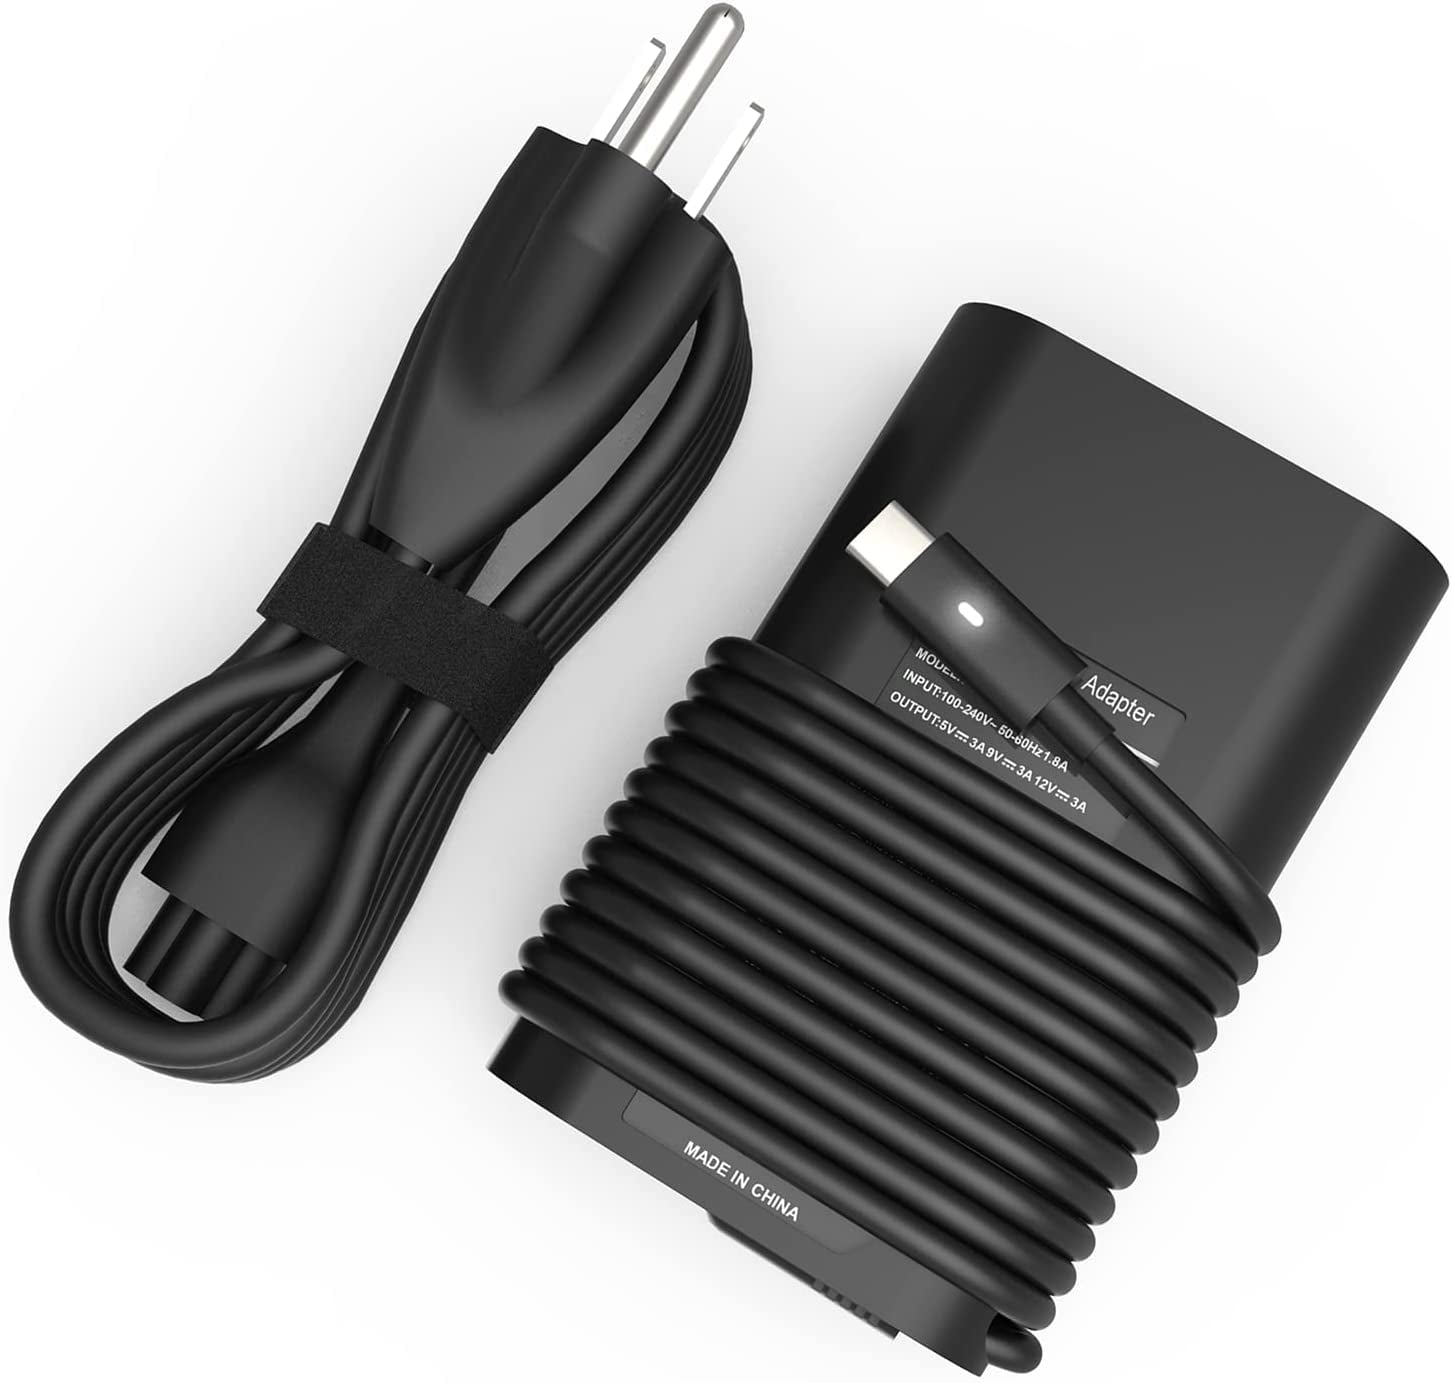 65W 45W USB C Laptop Charger for Dell Latitude 5420 7420 5520 7390 7370  5285 5289 5290 7275 7285 7400 7410 5179 XPS 13 9350 9360 9365 9370 9380  Chromebook 3100 5190 Type-C AC Adapter Power Supply Cord 